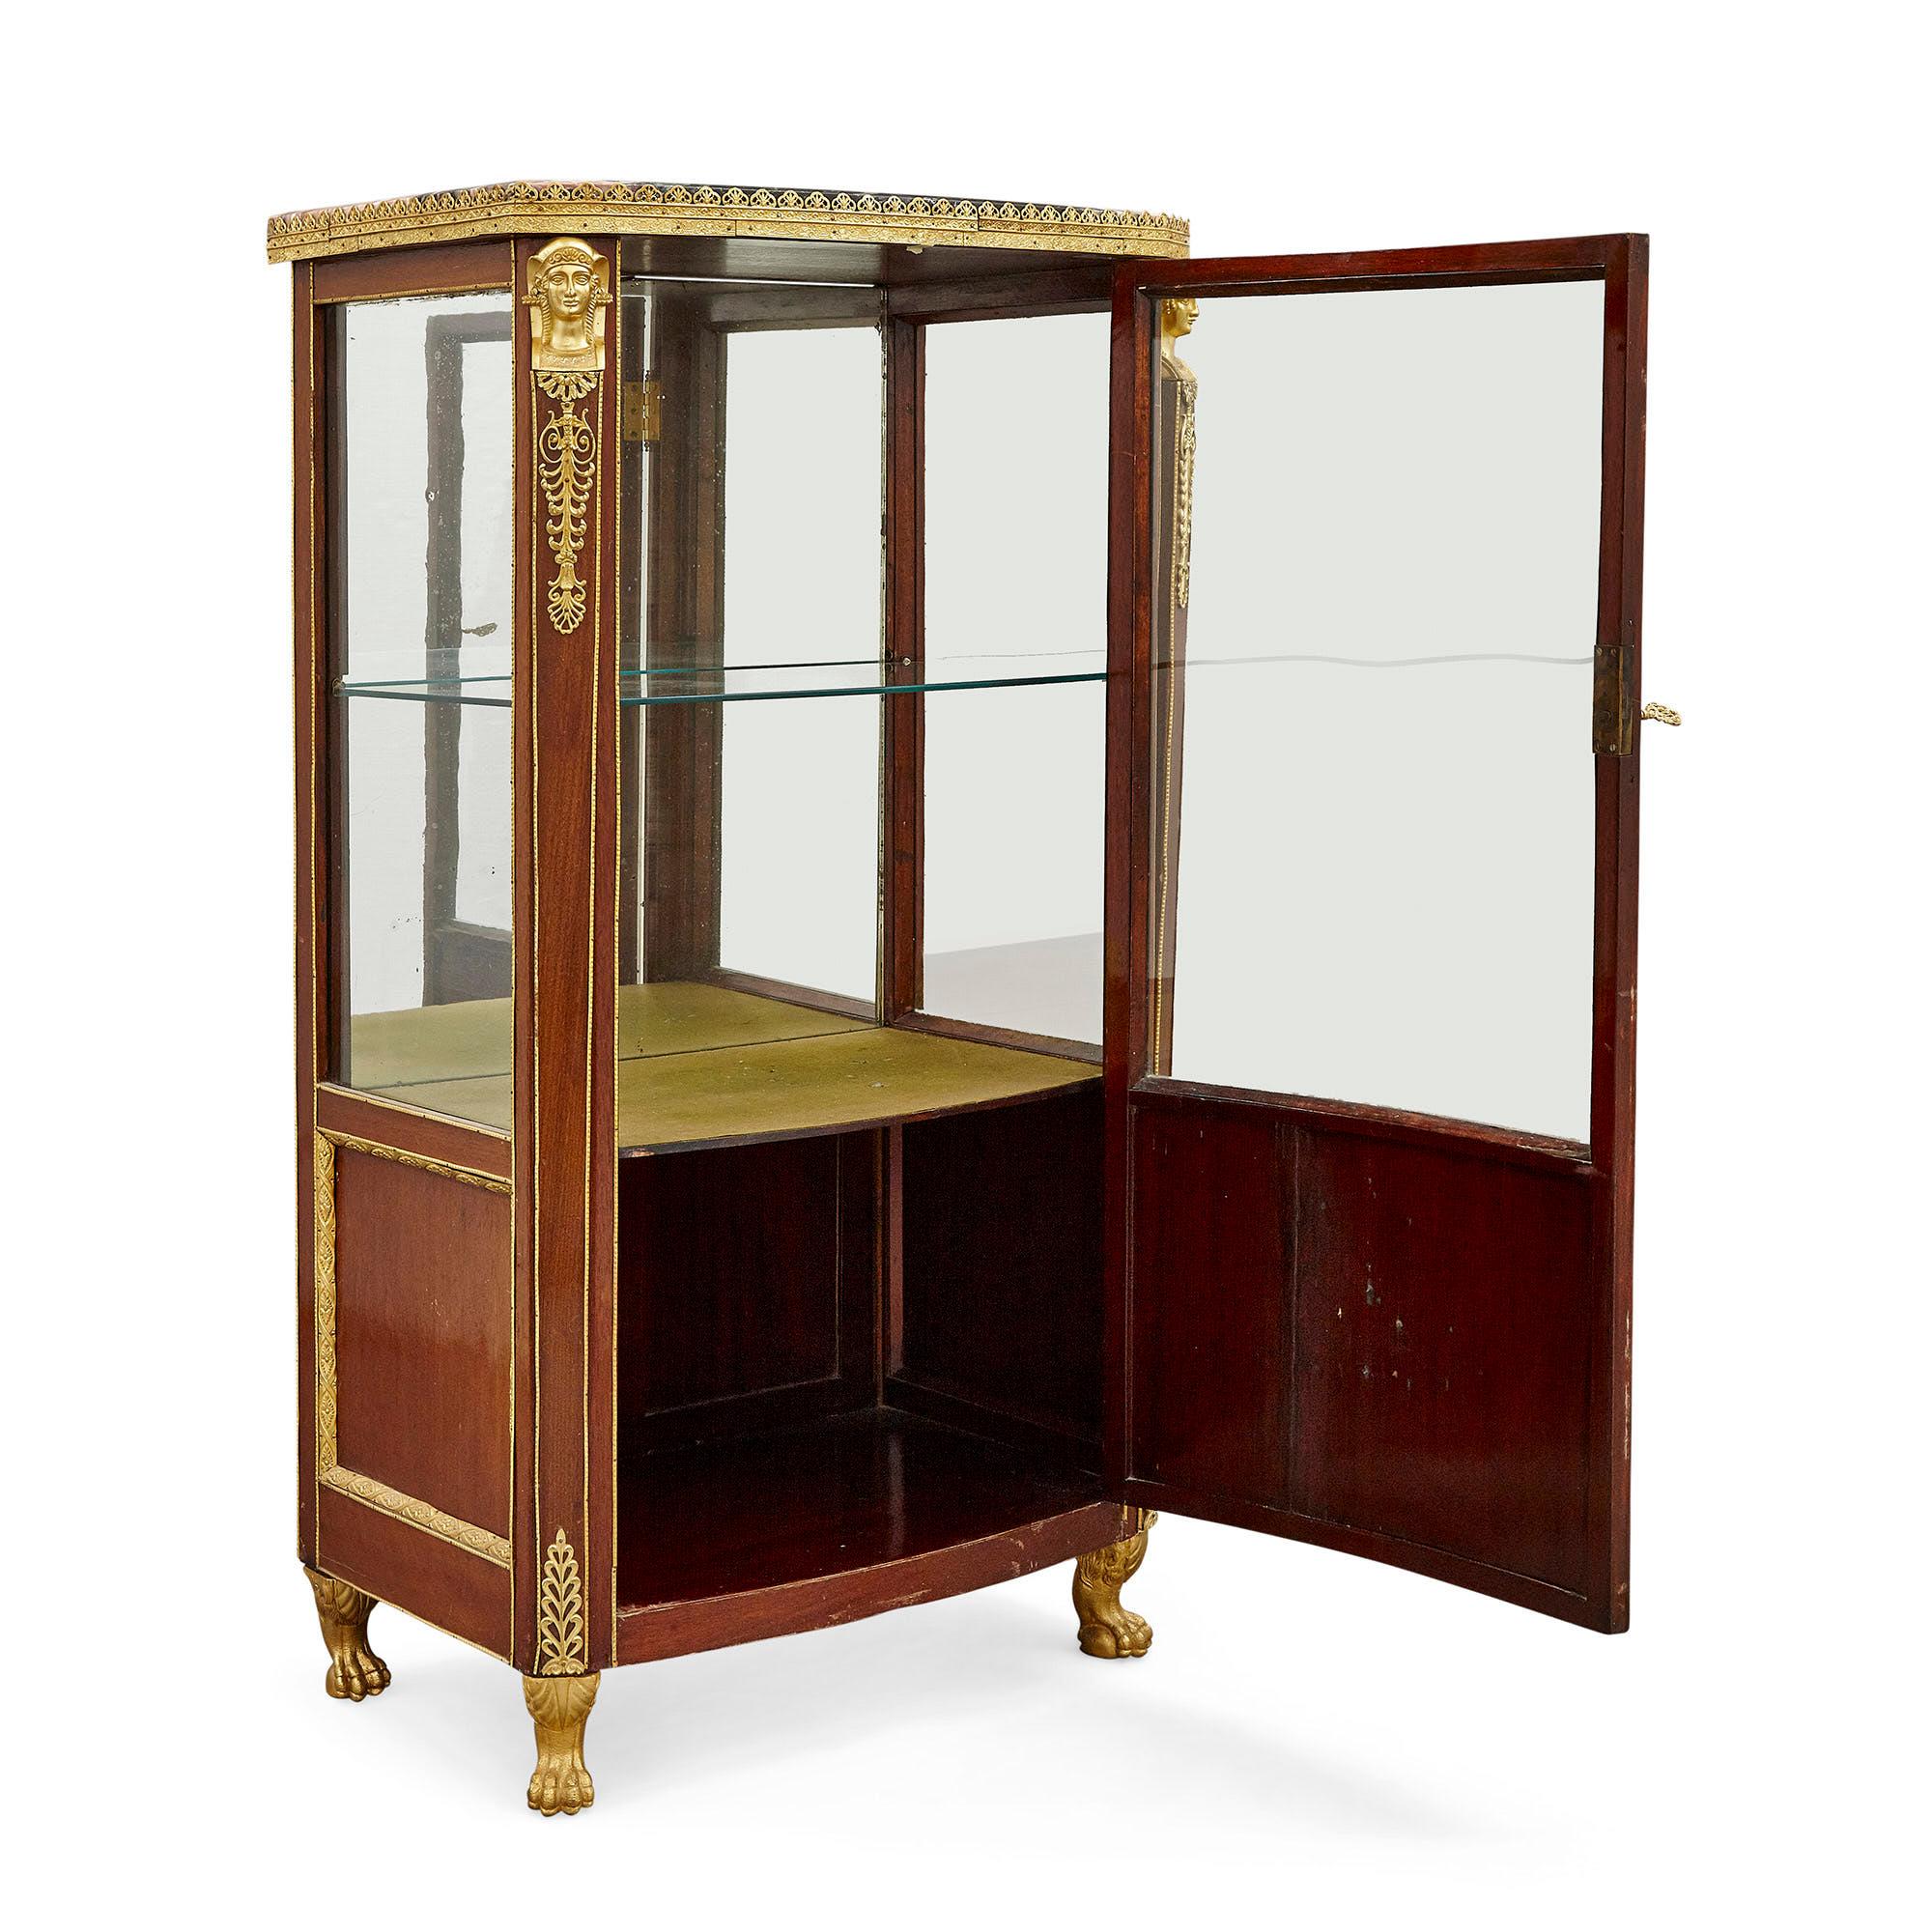 Antique French marble topped vitrine in the Empire style
French, 19th century
Measures: Height 132cm, width 72cm, depth 47cm

This antique mahogany vitrine was made in France and takes after the opulence of French design during the Empire period